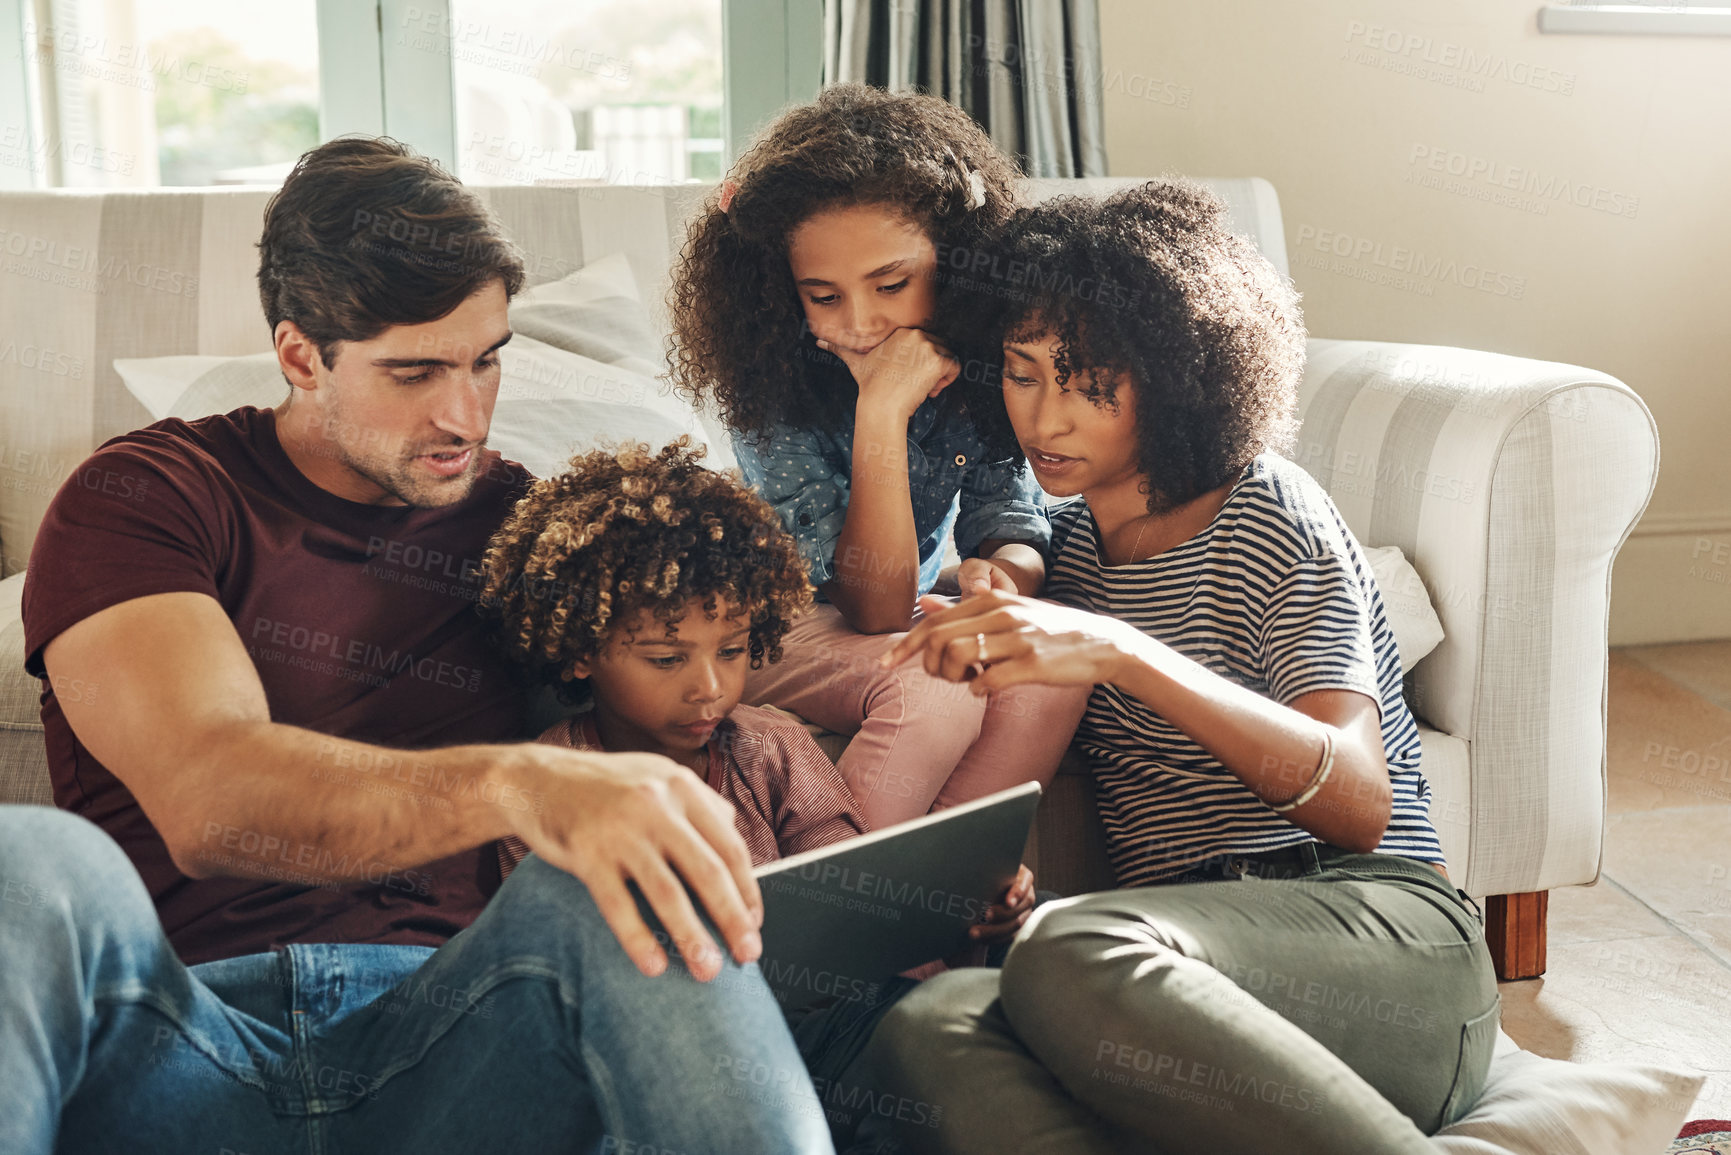 Buy stock photo Shot of a beautiful young family of four using a digital tablet together while relaxing on a sofa at home